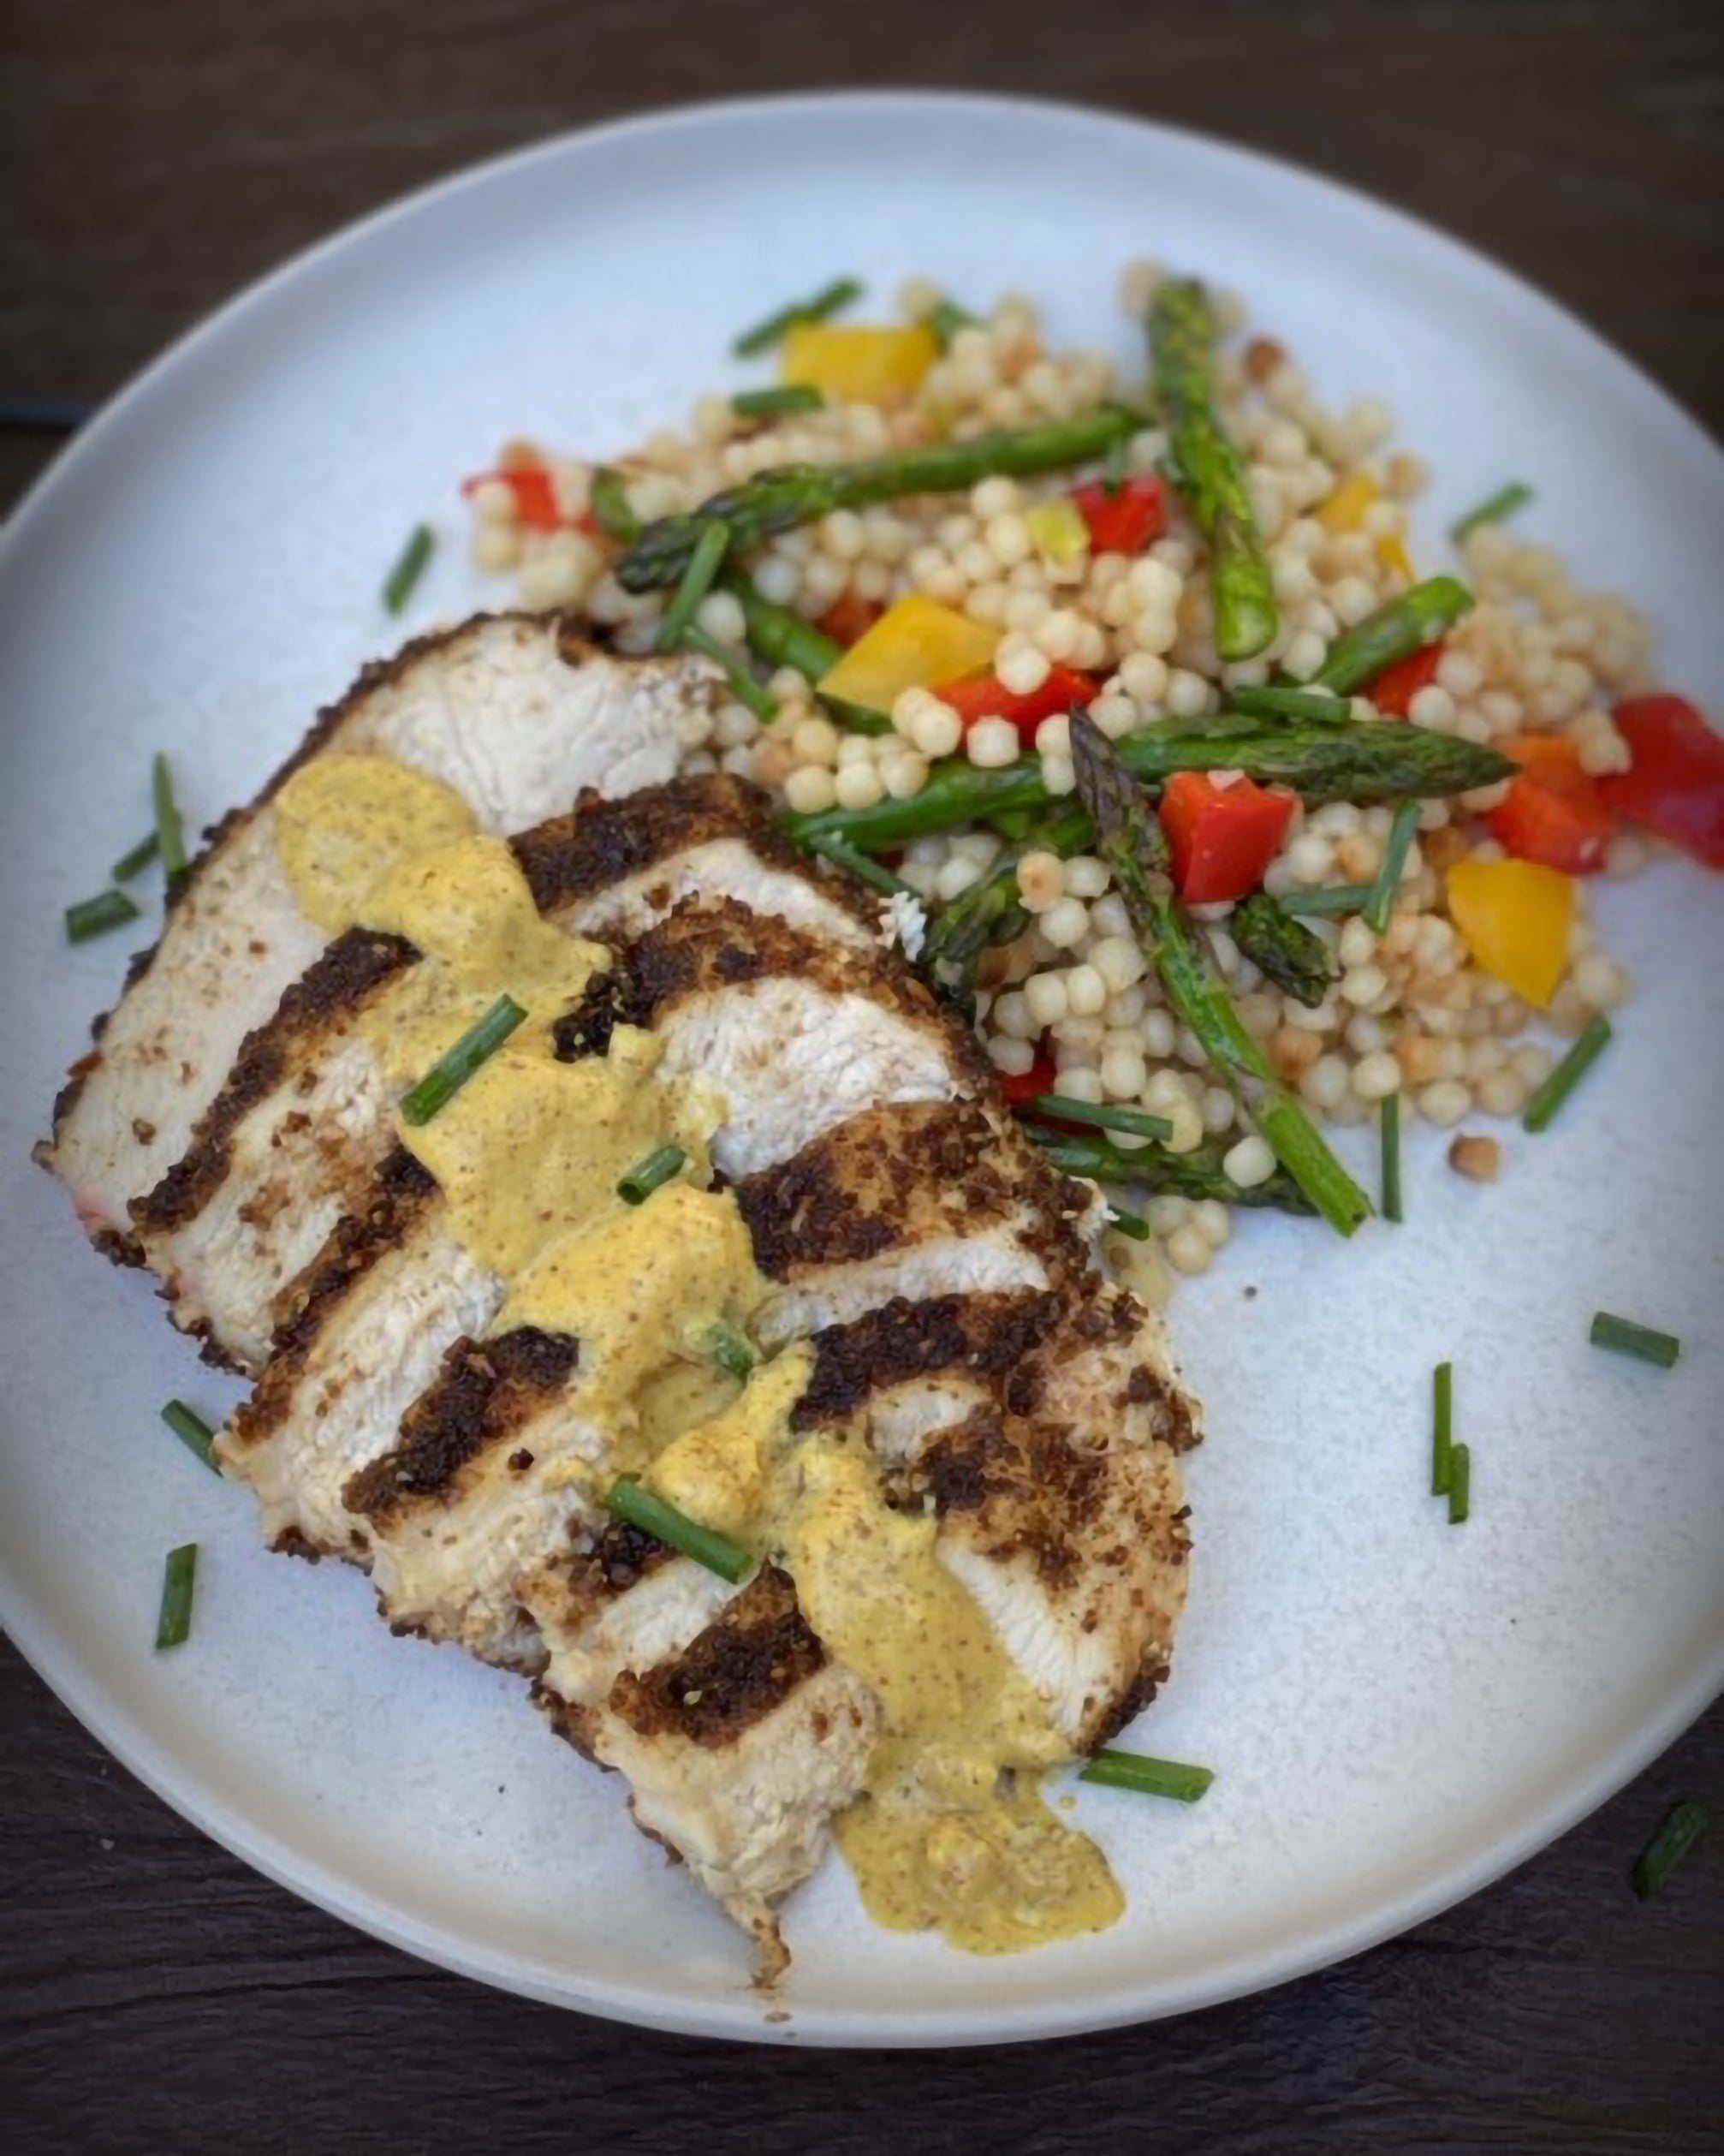 Garlic Peppercorn Chicken with Couscous and Veggies